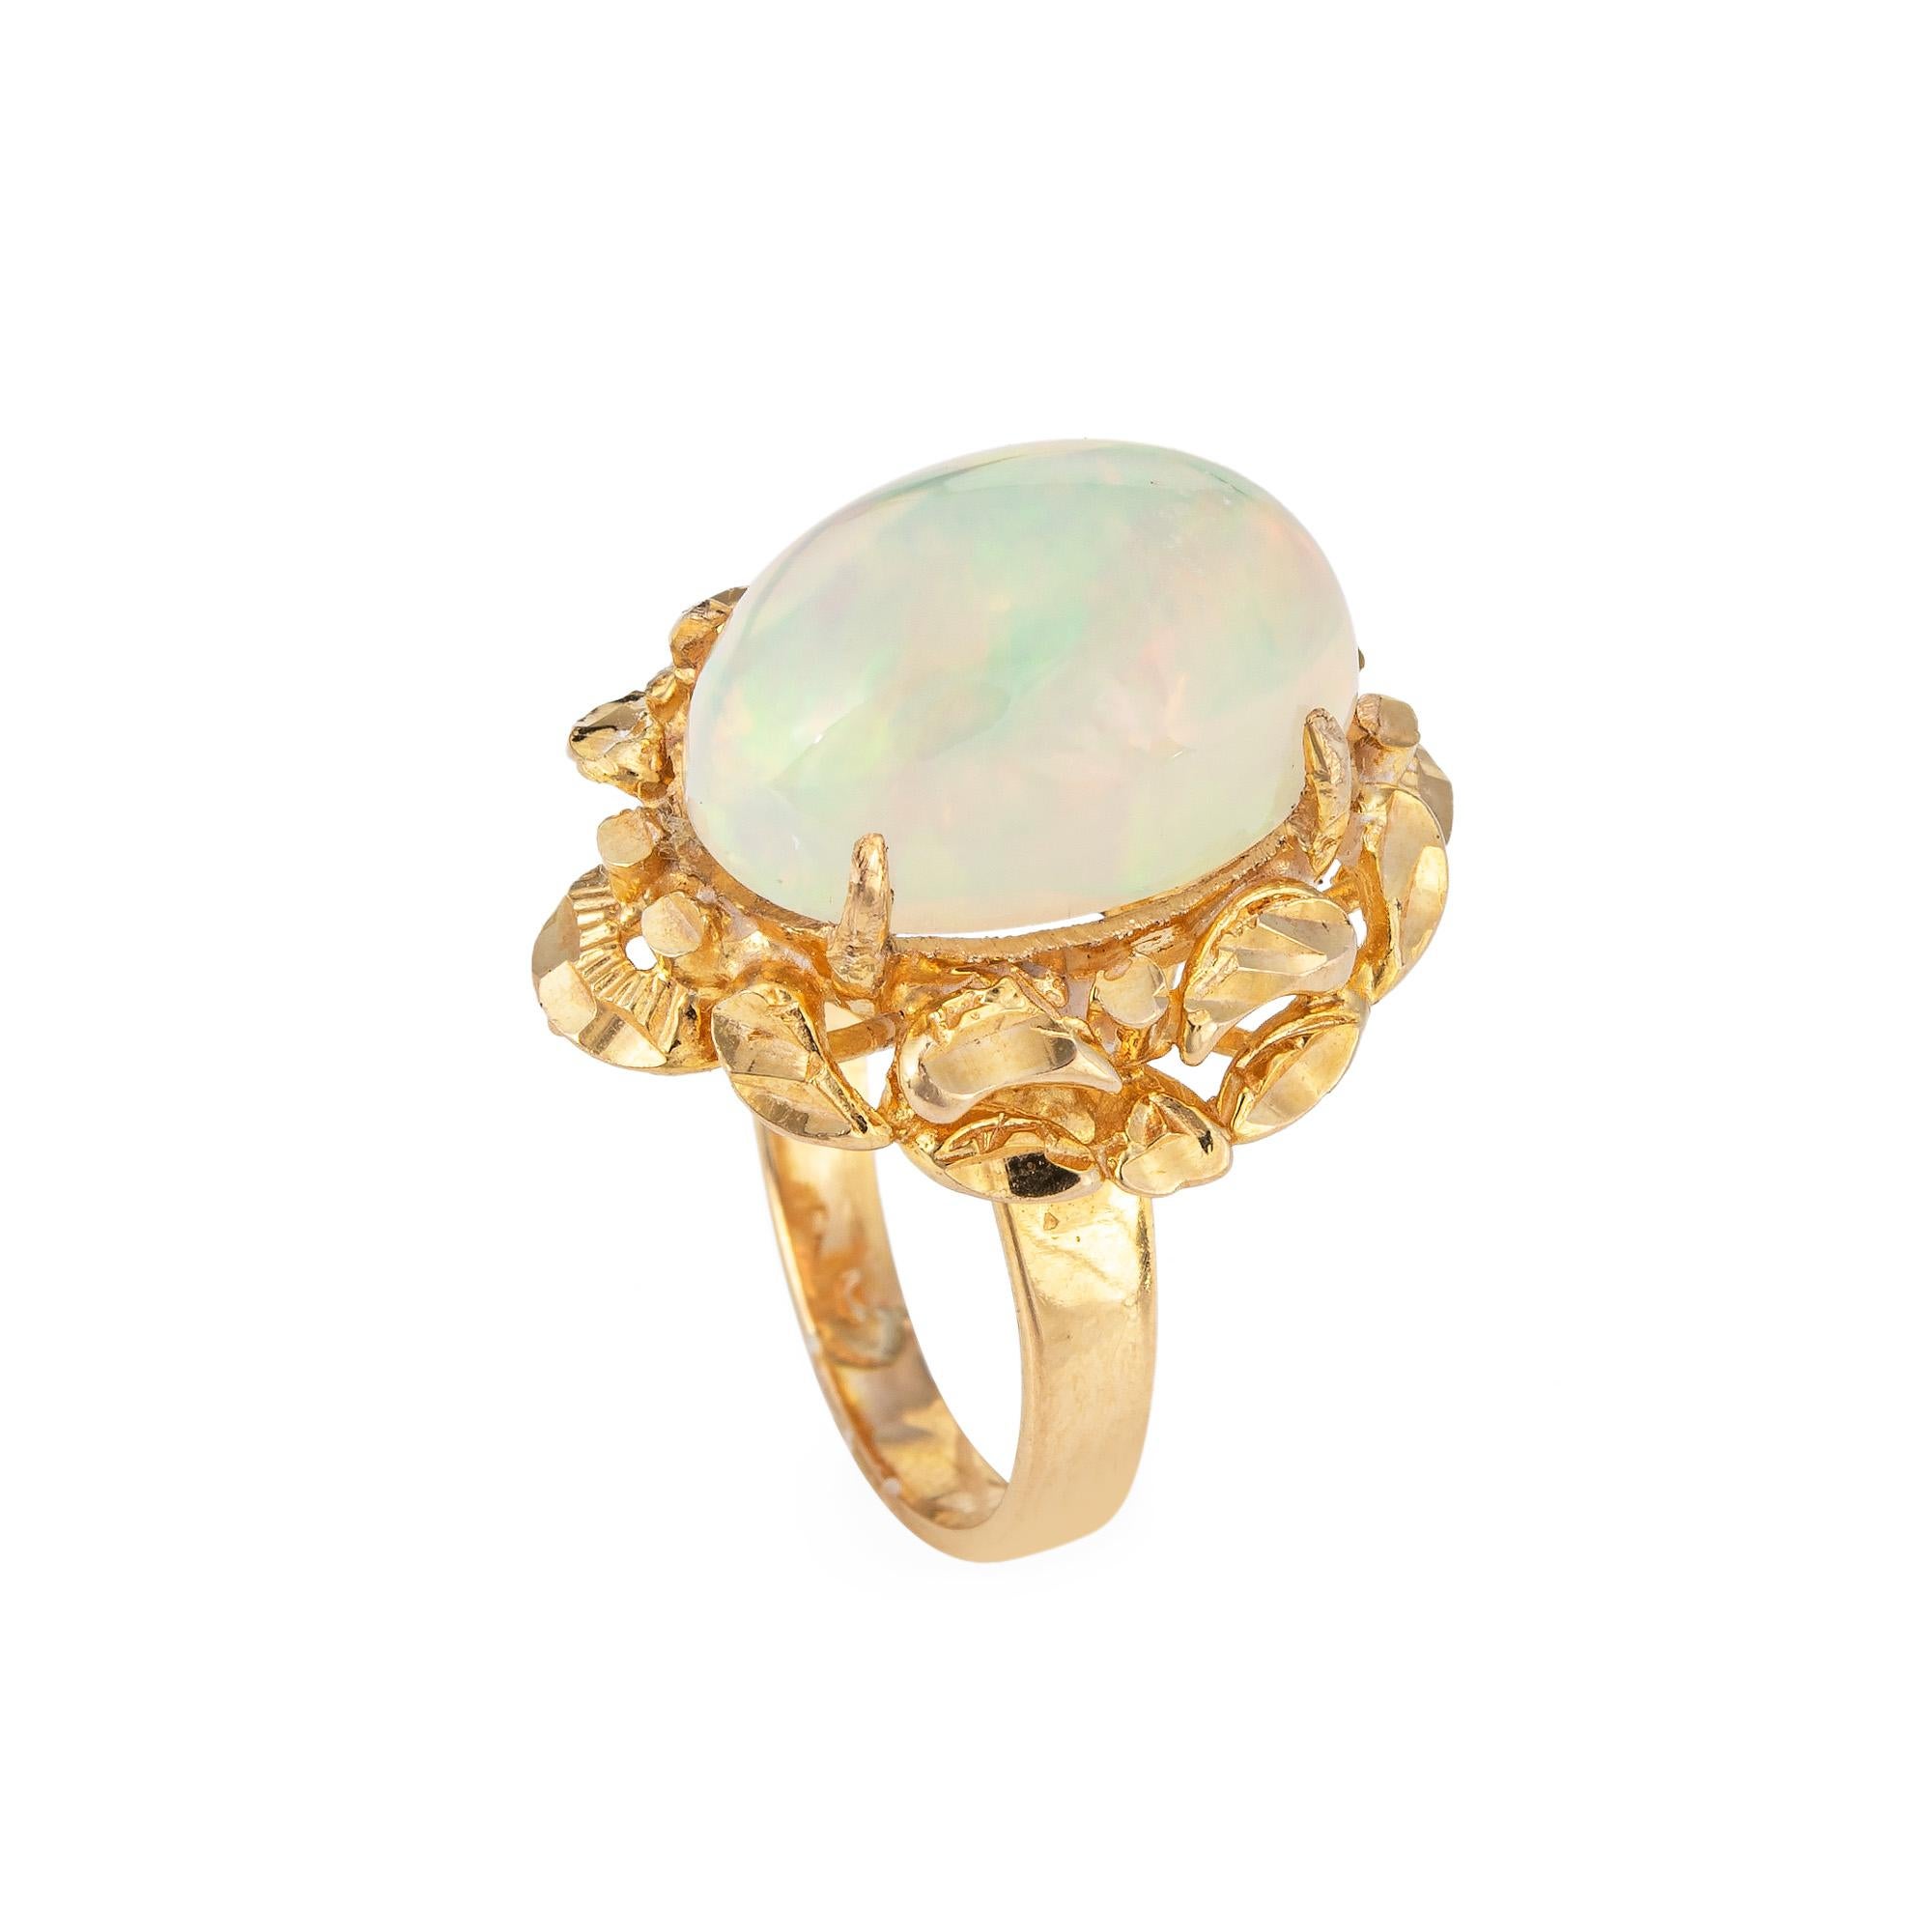 Stylish vintage opal cocktail ring (circa 1970s) crafted in 14 karat yellow gold. 

Cabochon cut opal measures 15.5mm x 11.5mm (estimated at 7 carats). The opal is in very good condition and free of cracks or chips. 

The natural Ethiopian opal is